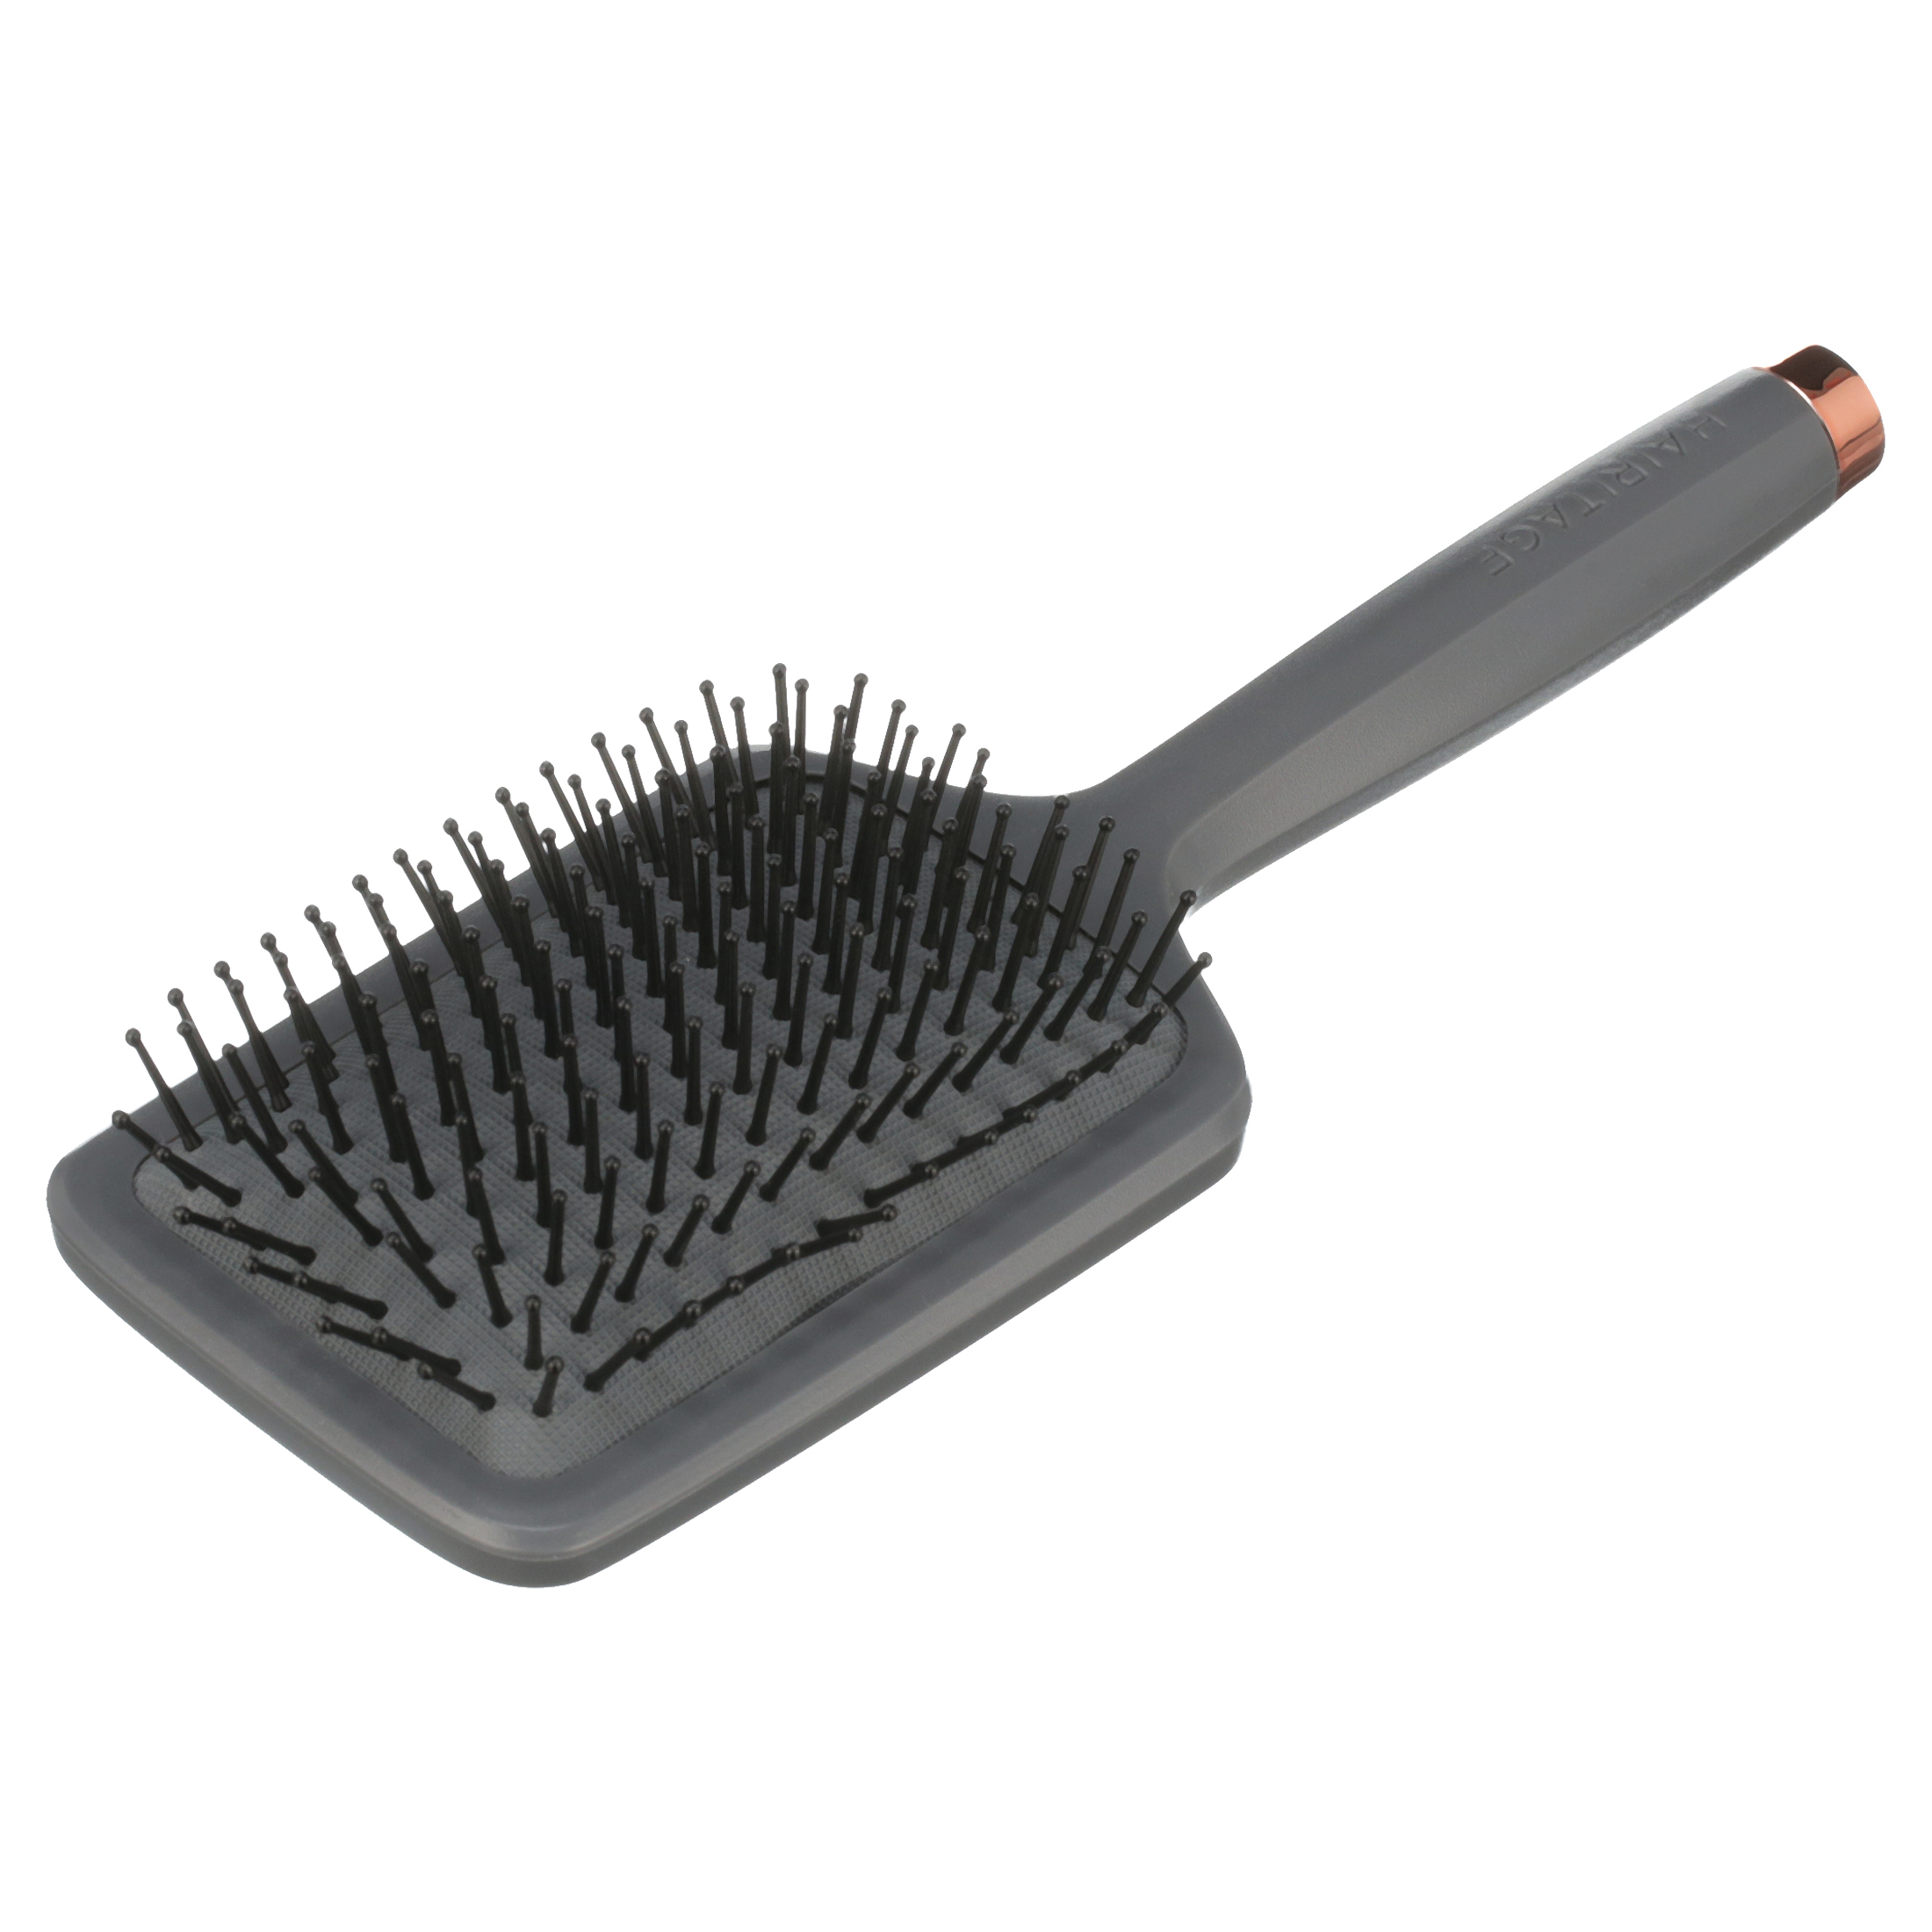 Hairitage Brush It Off Detangling & Smoothing Paddle Hair Brush for Women | Anti Frizz | for Wet & Dry Hair, 1 PC - image 11 of 12